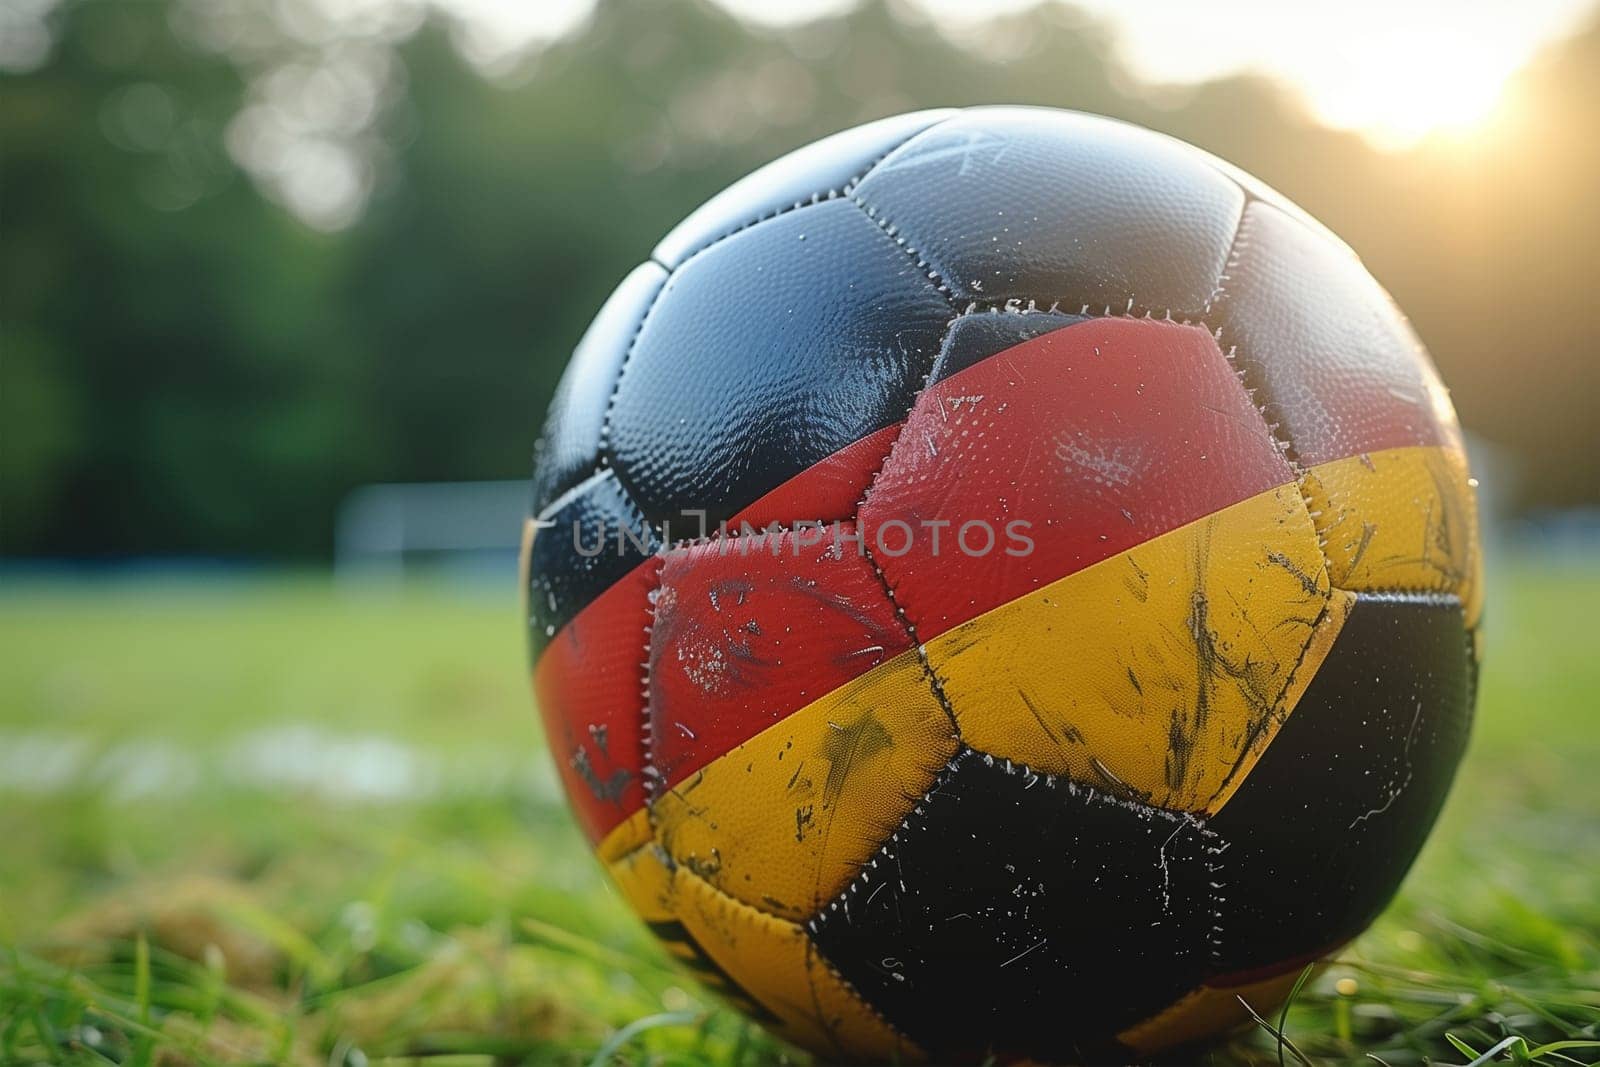 A soccer ball rests on a vibrant green playing field, ready for action under the bright sun.